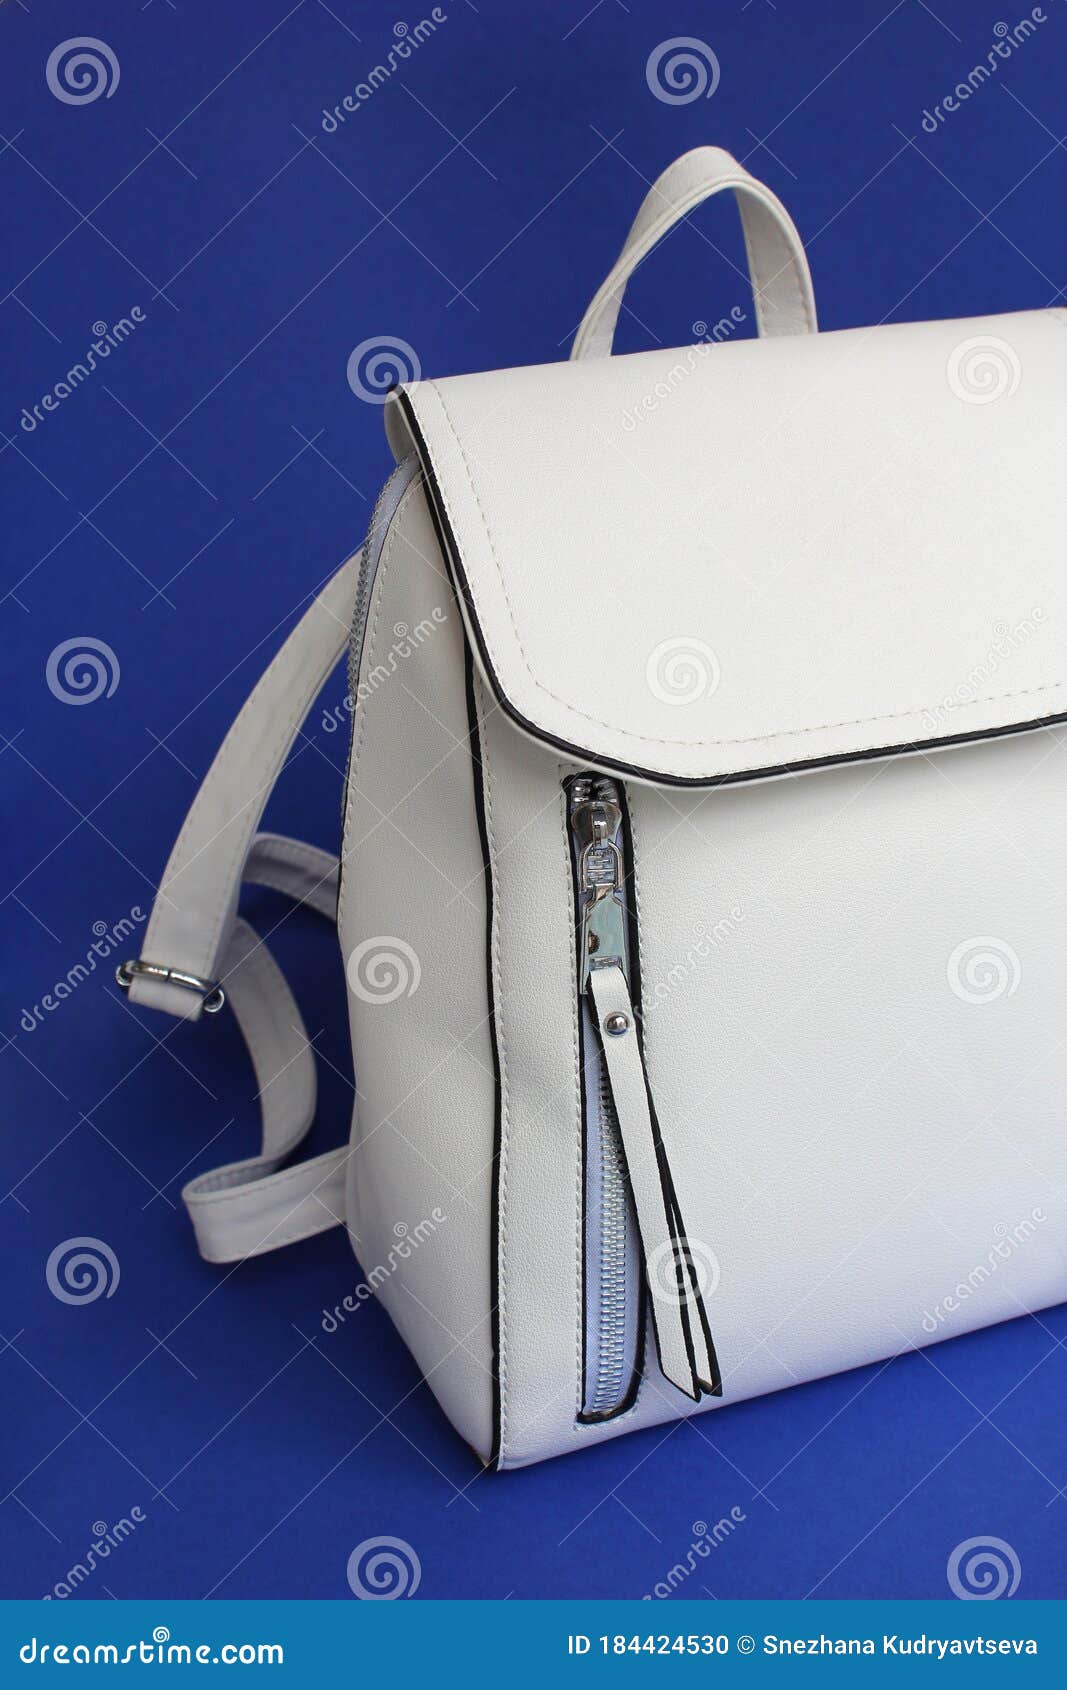 white bag backpack on a blue background